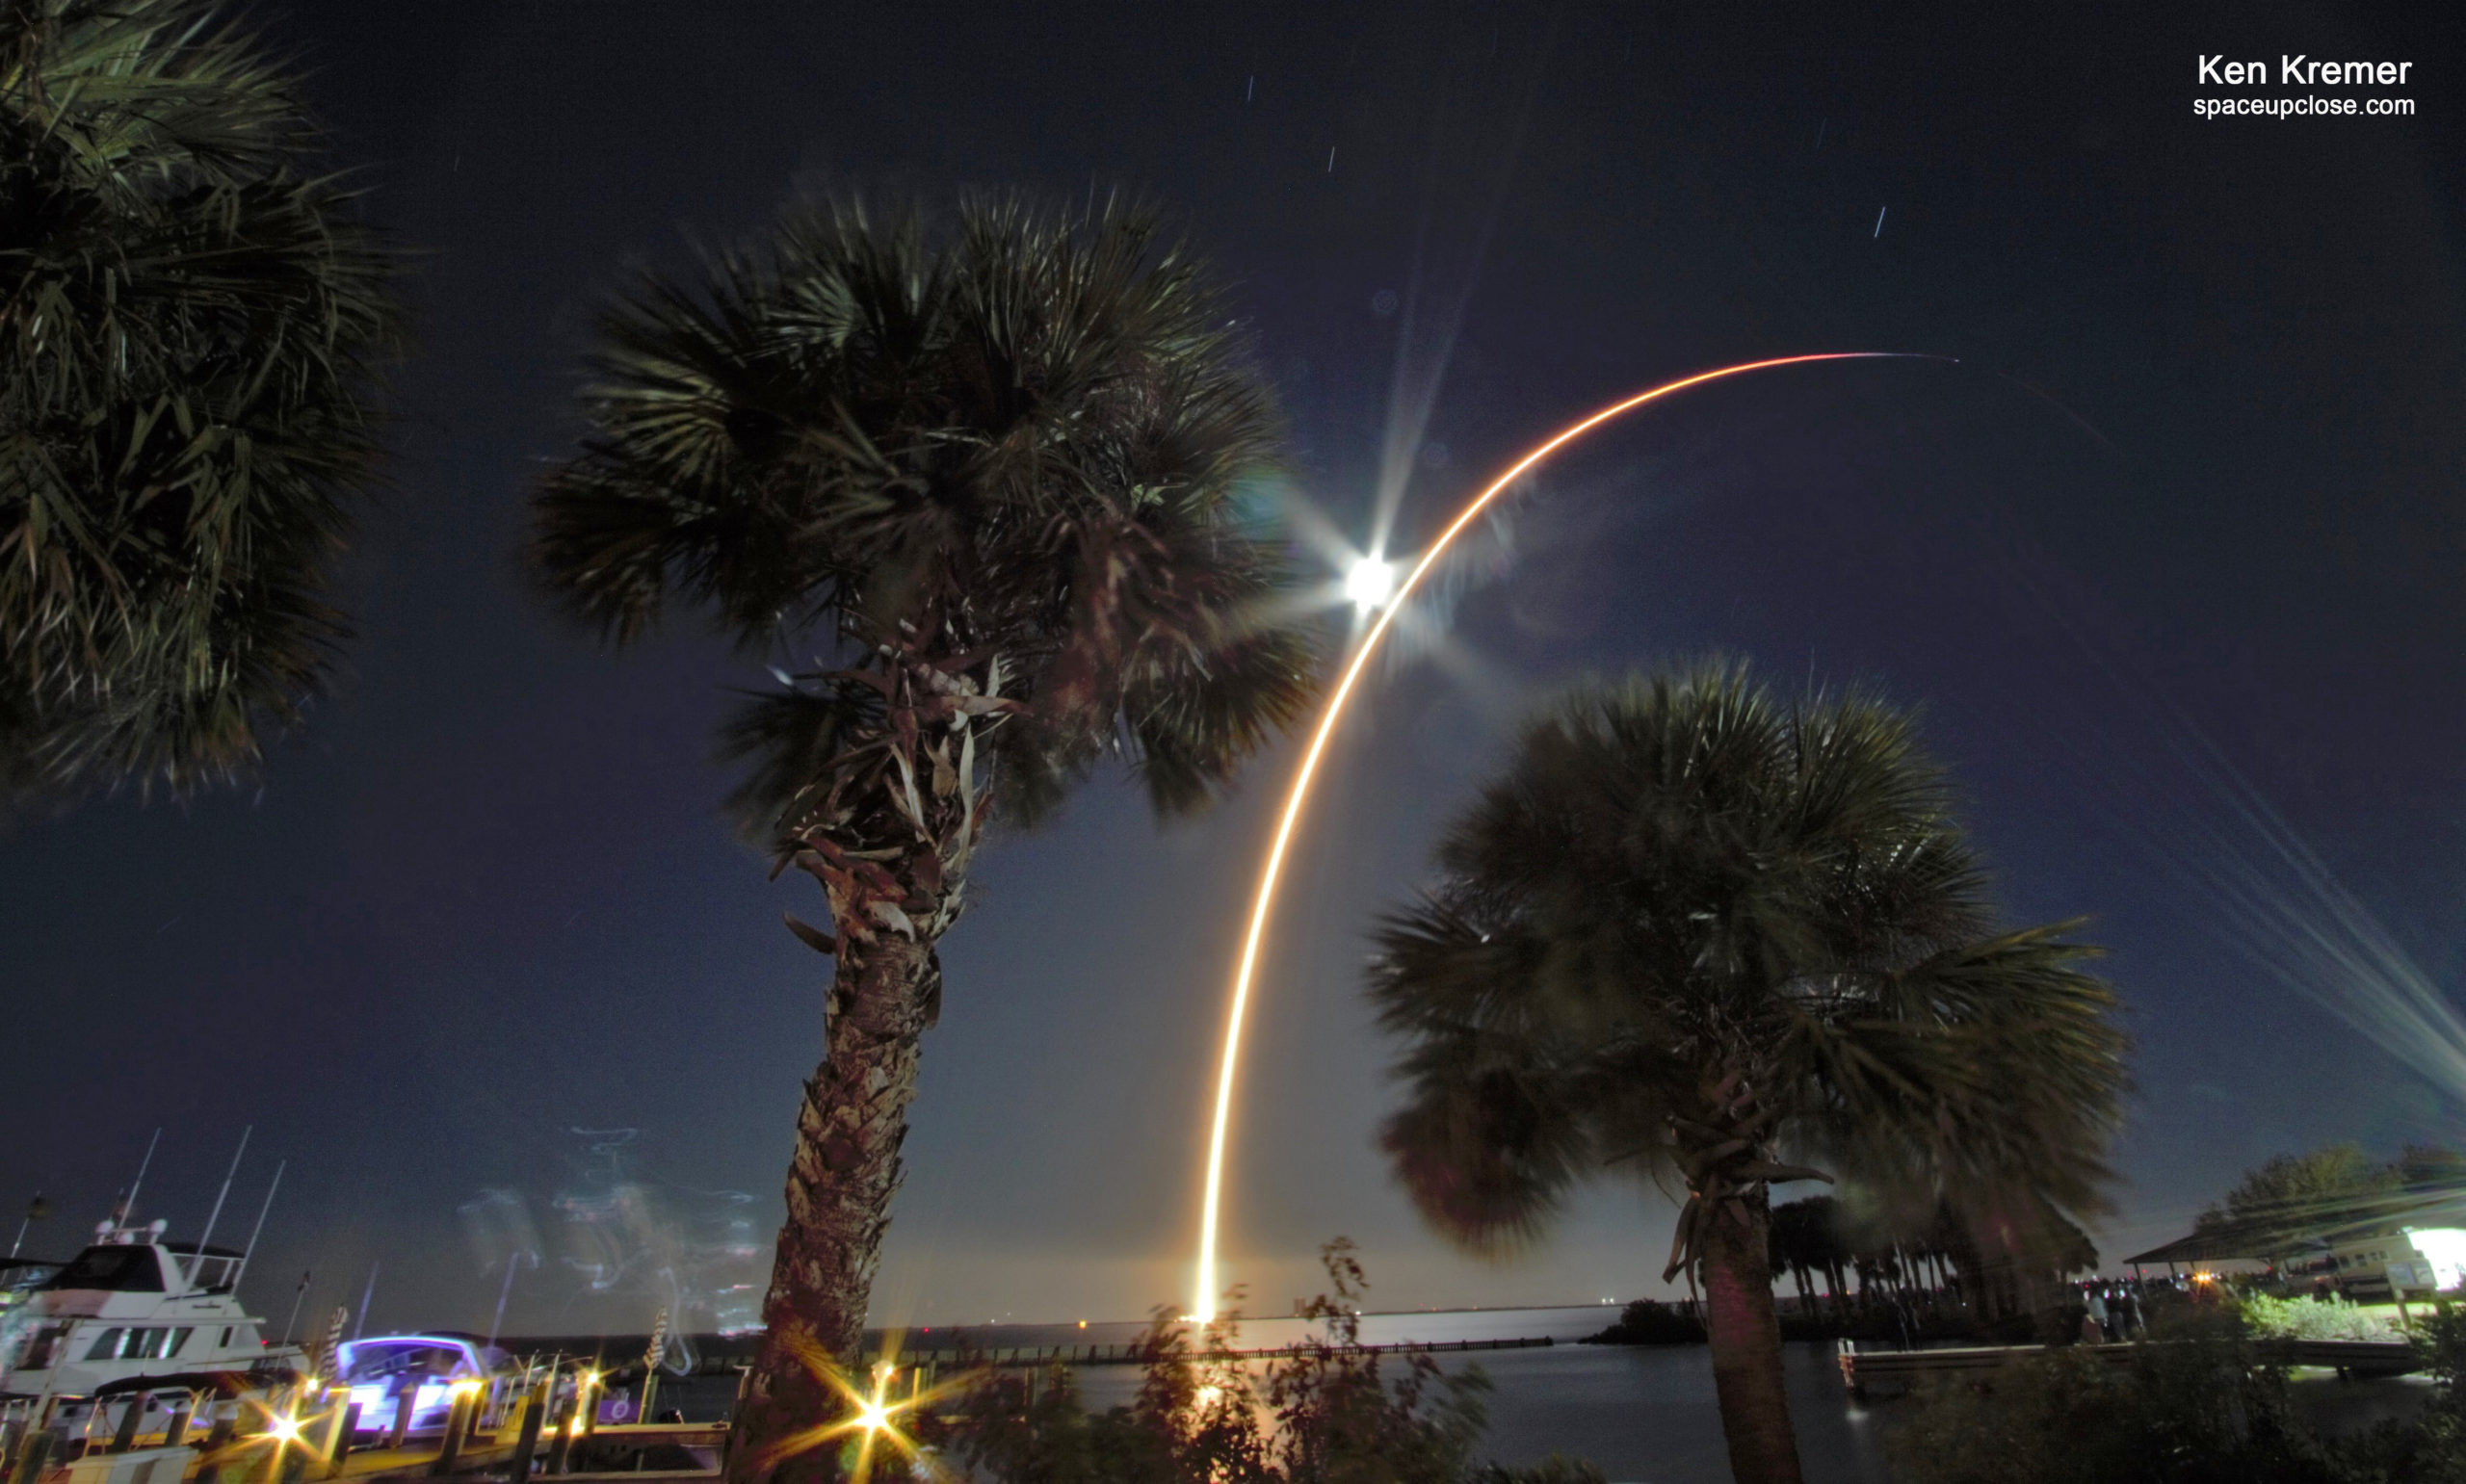 SpaceX Falcon 9 Delivers 2000th Starlink to Orbit with Stunning Streak Past Full Moon: Photos